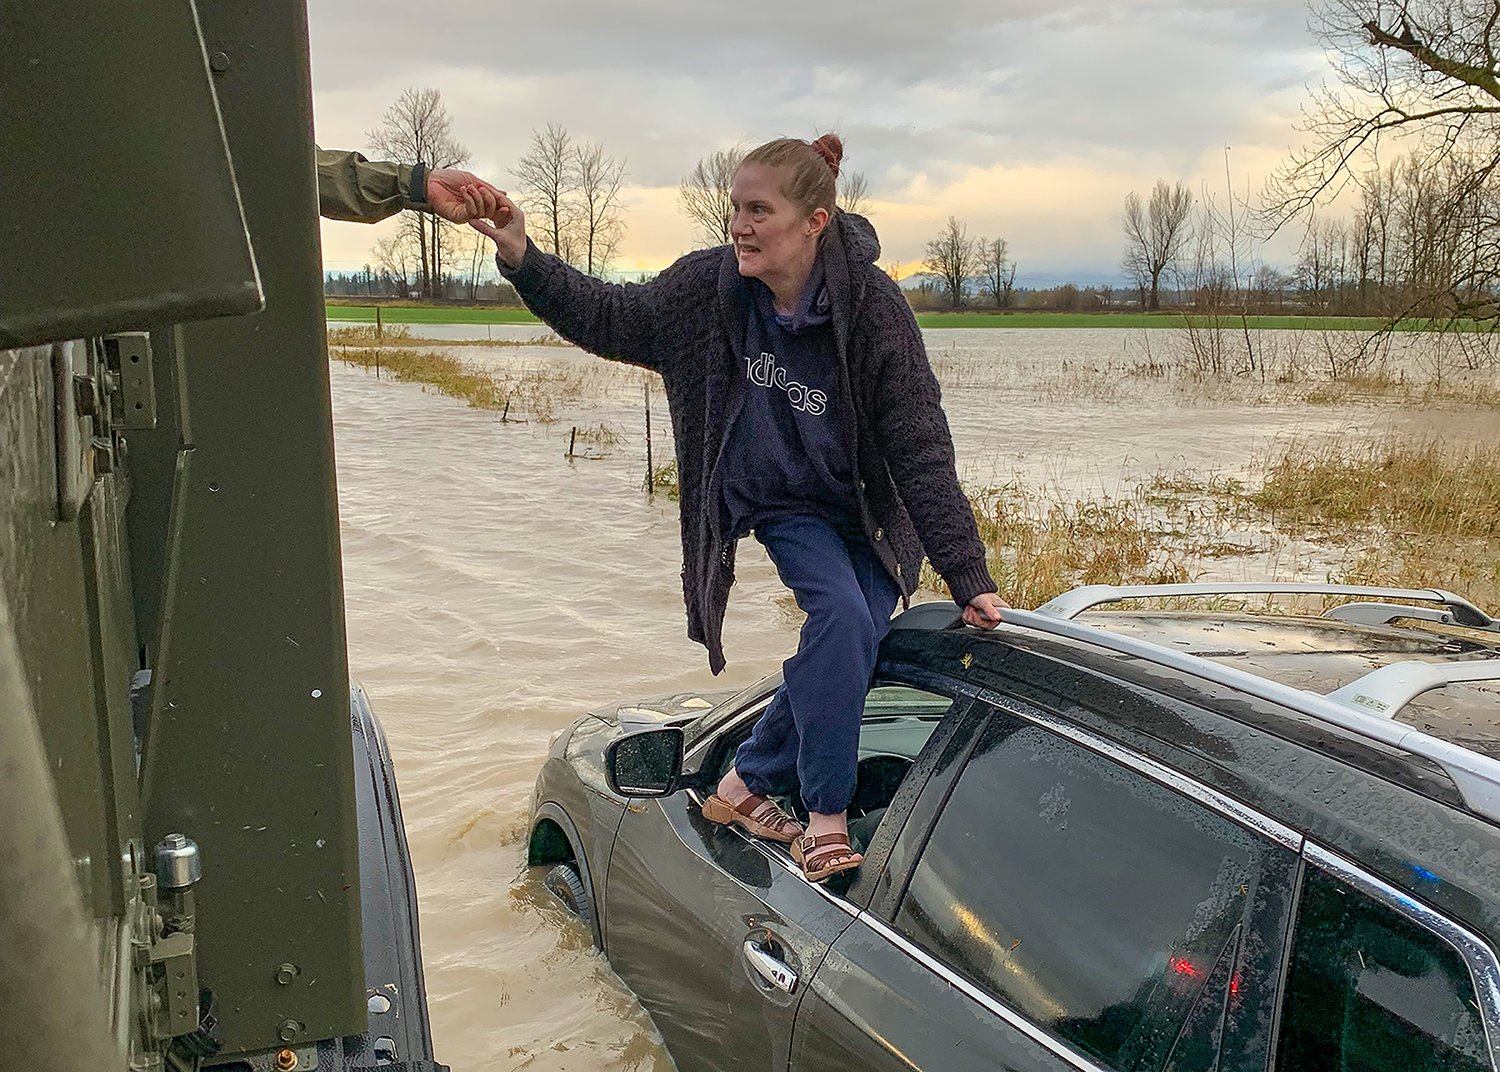 Everson Mayor John Perry, local police and community members equipped with boats and trucks worked tirelessly to reach those in need. (Whatcom County Sheriff’s Office)